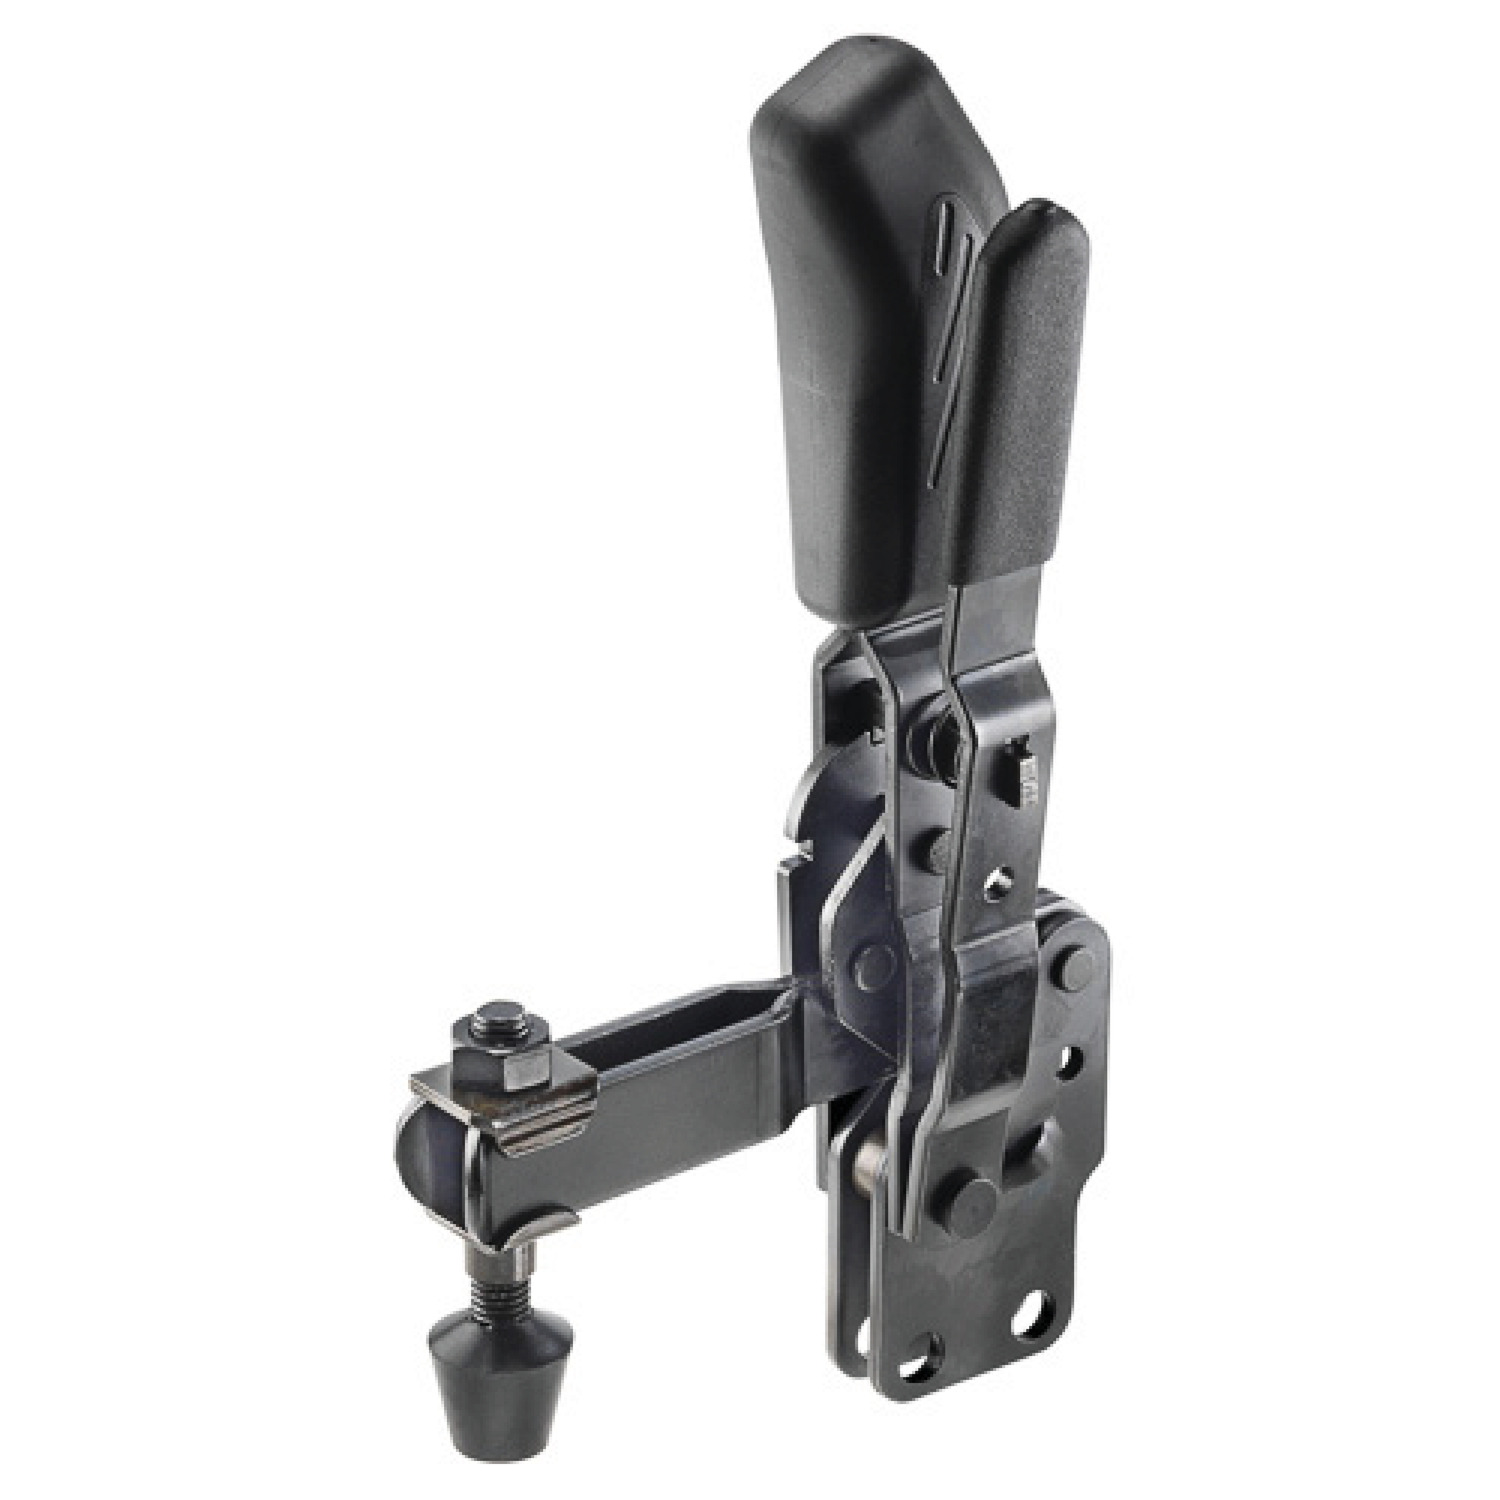 Product 40060.2, Horizontal Acting Toggle Clamps black - open arm - vertical base - safety lever / 